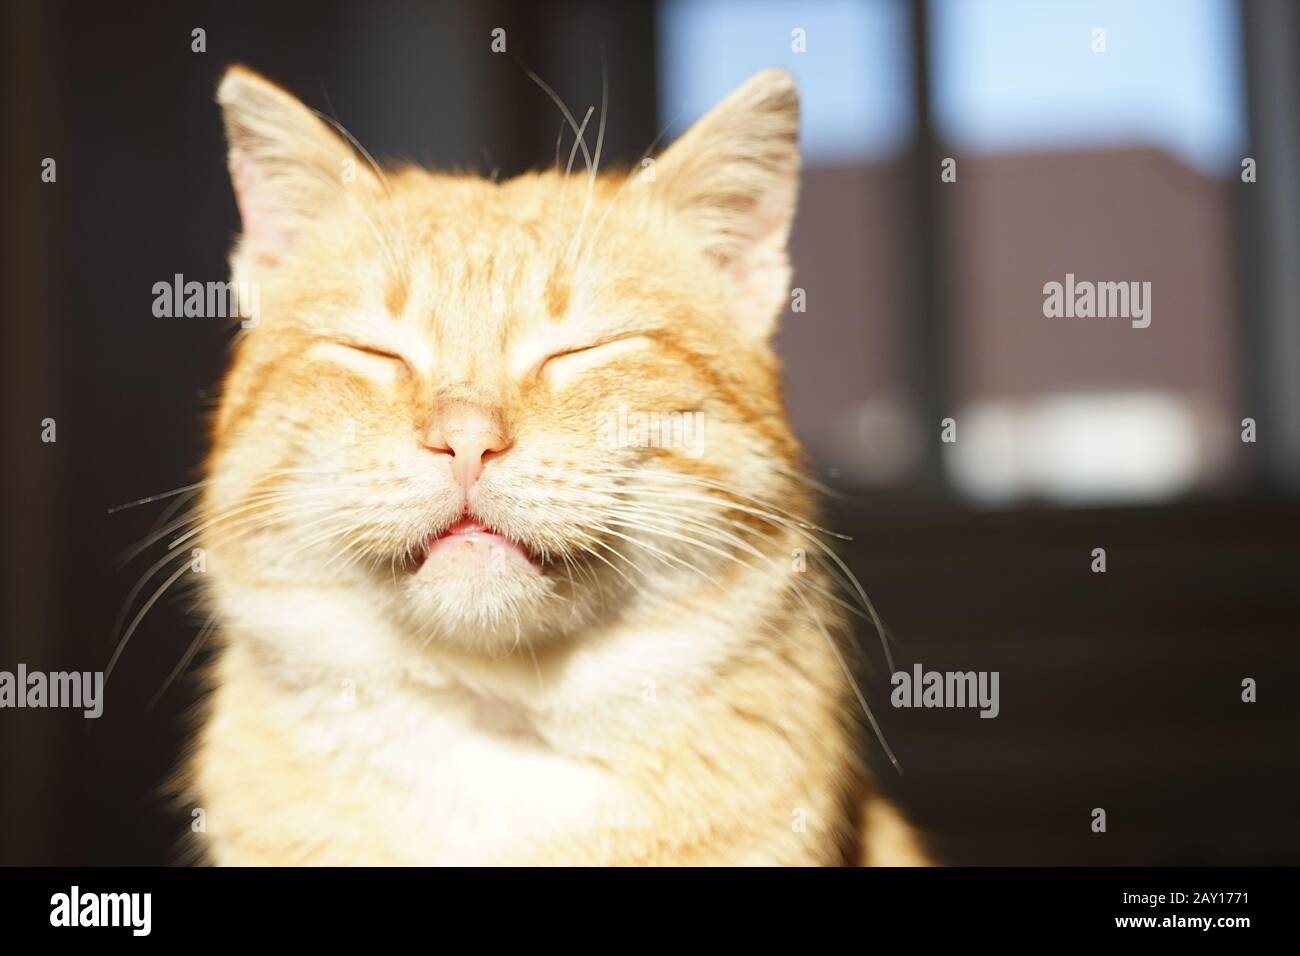 Cute ginger cat face with closed eyes. Pet portrait in sunlight. Stock Photo